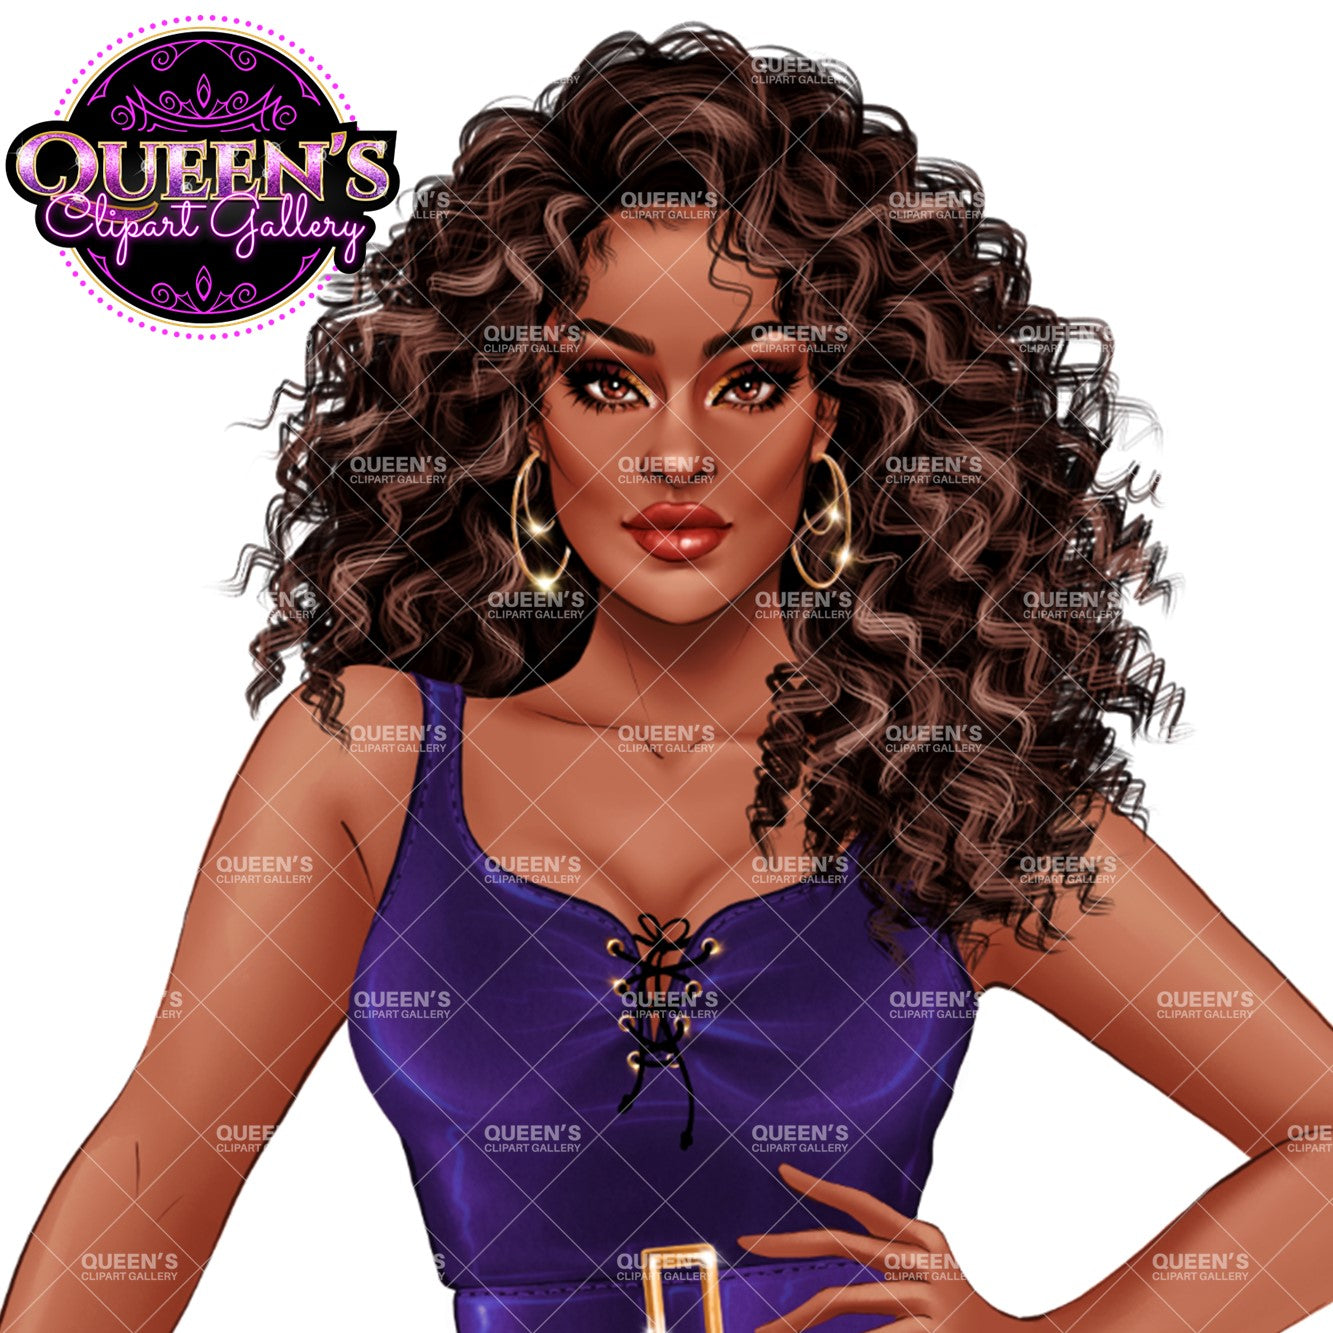 Witch, Halloween clipart, Witch clipart, Halloween, Witchy art, Afro girl, Black woman clipart, Fashion girl clipart, Fashion illustration